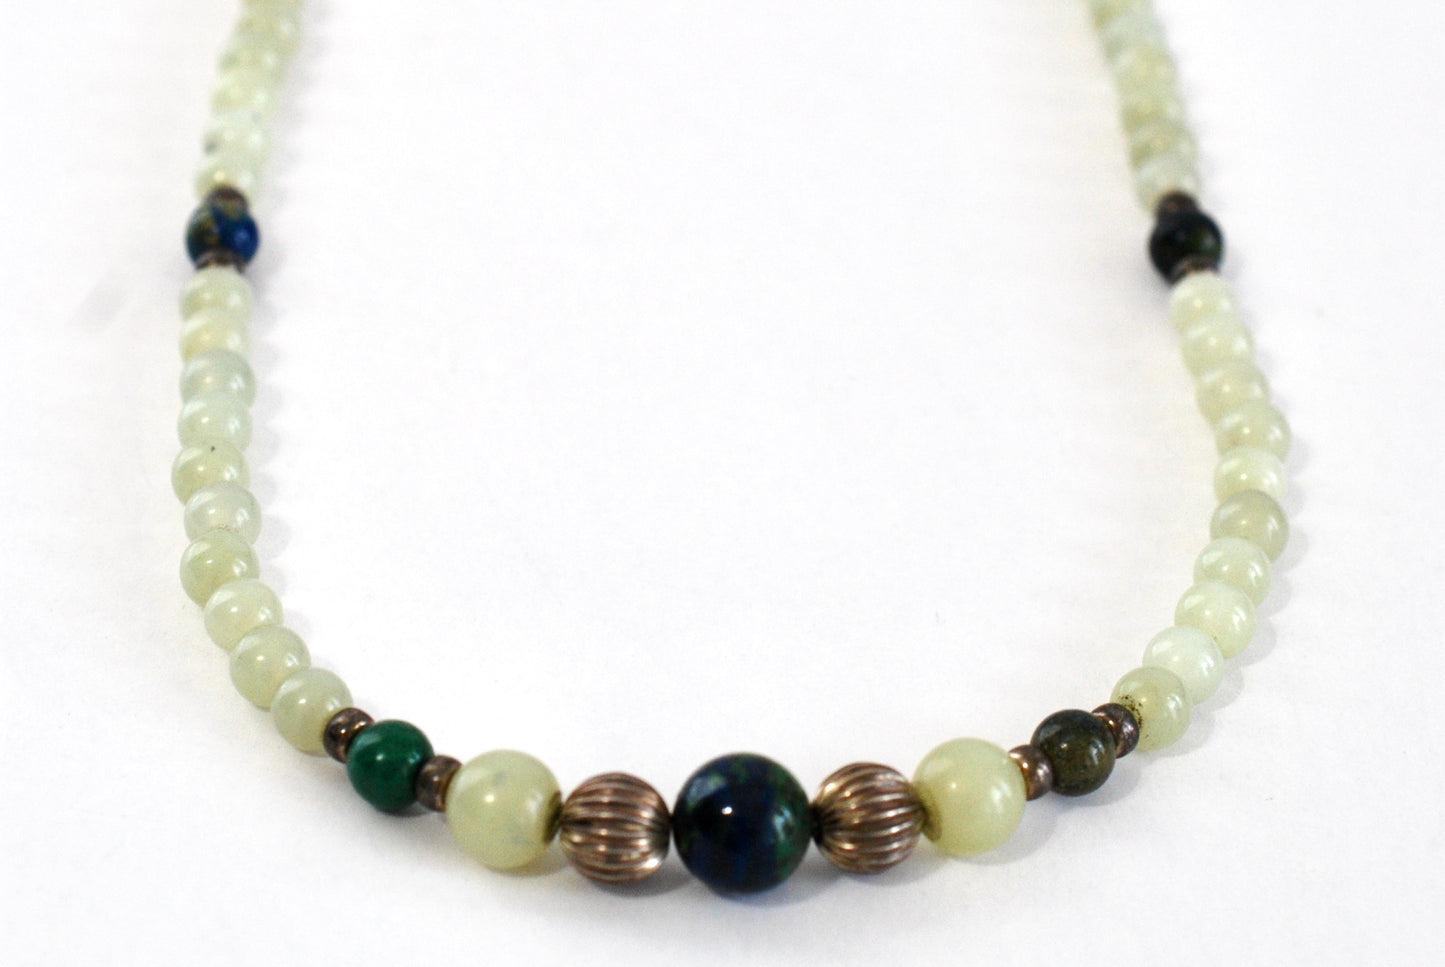 Jadeite Bead Necklace with Malachite, Azurite, and Silver